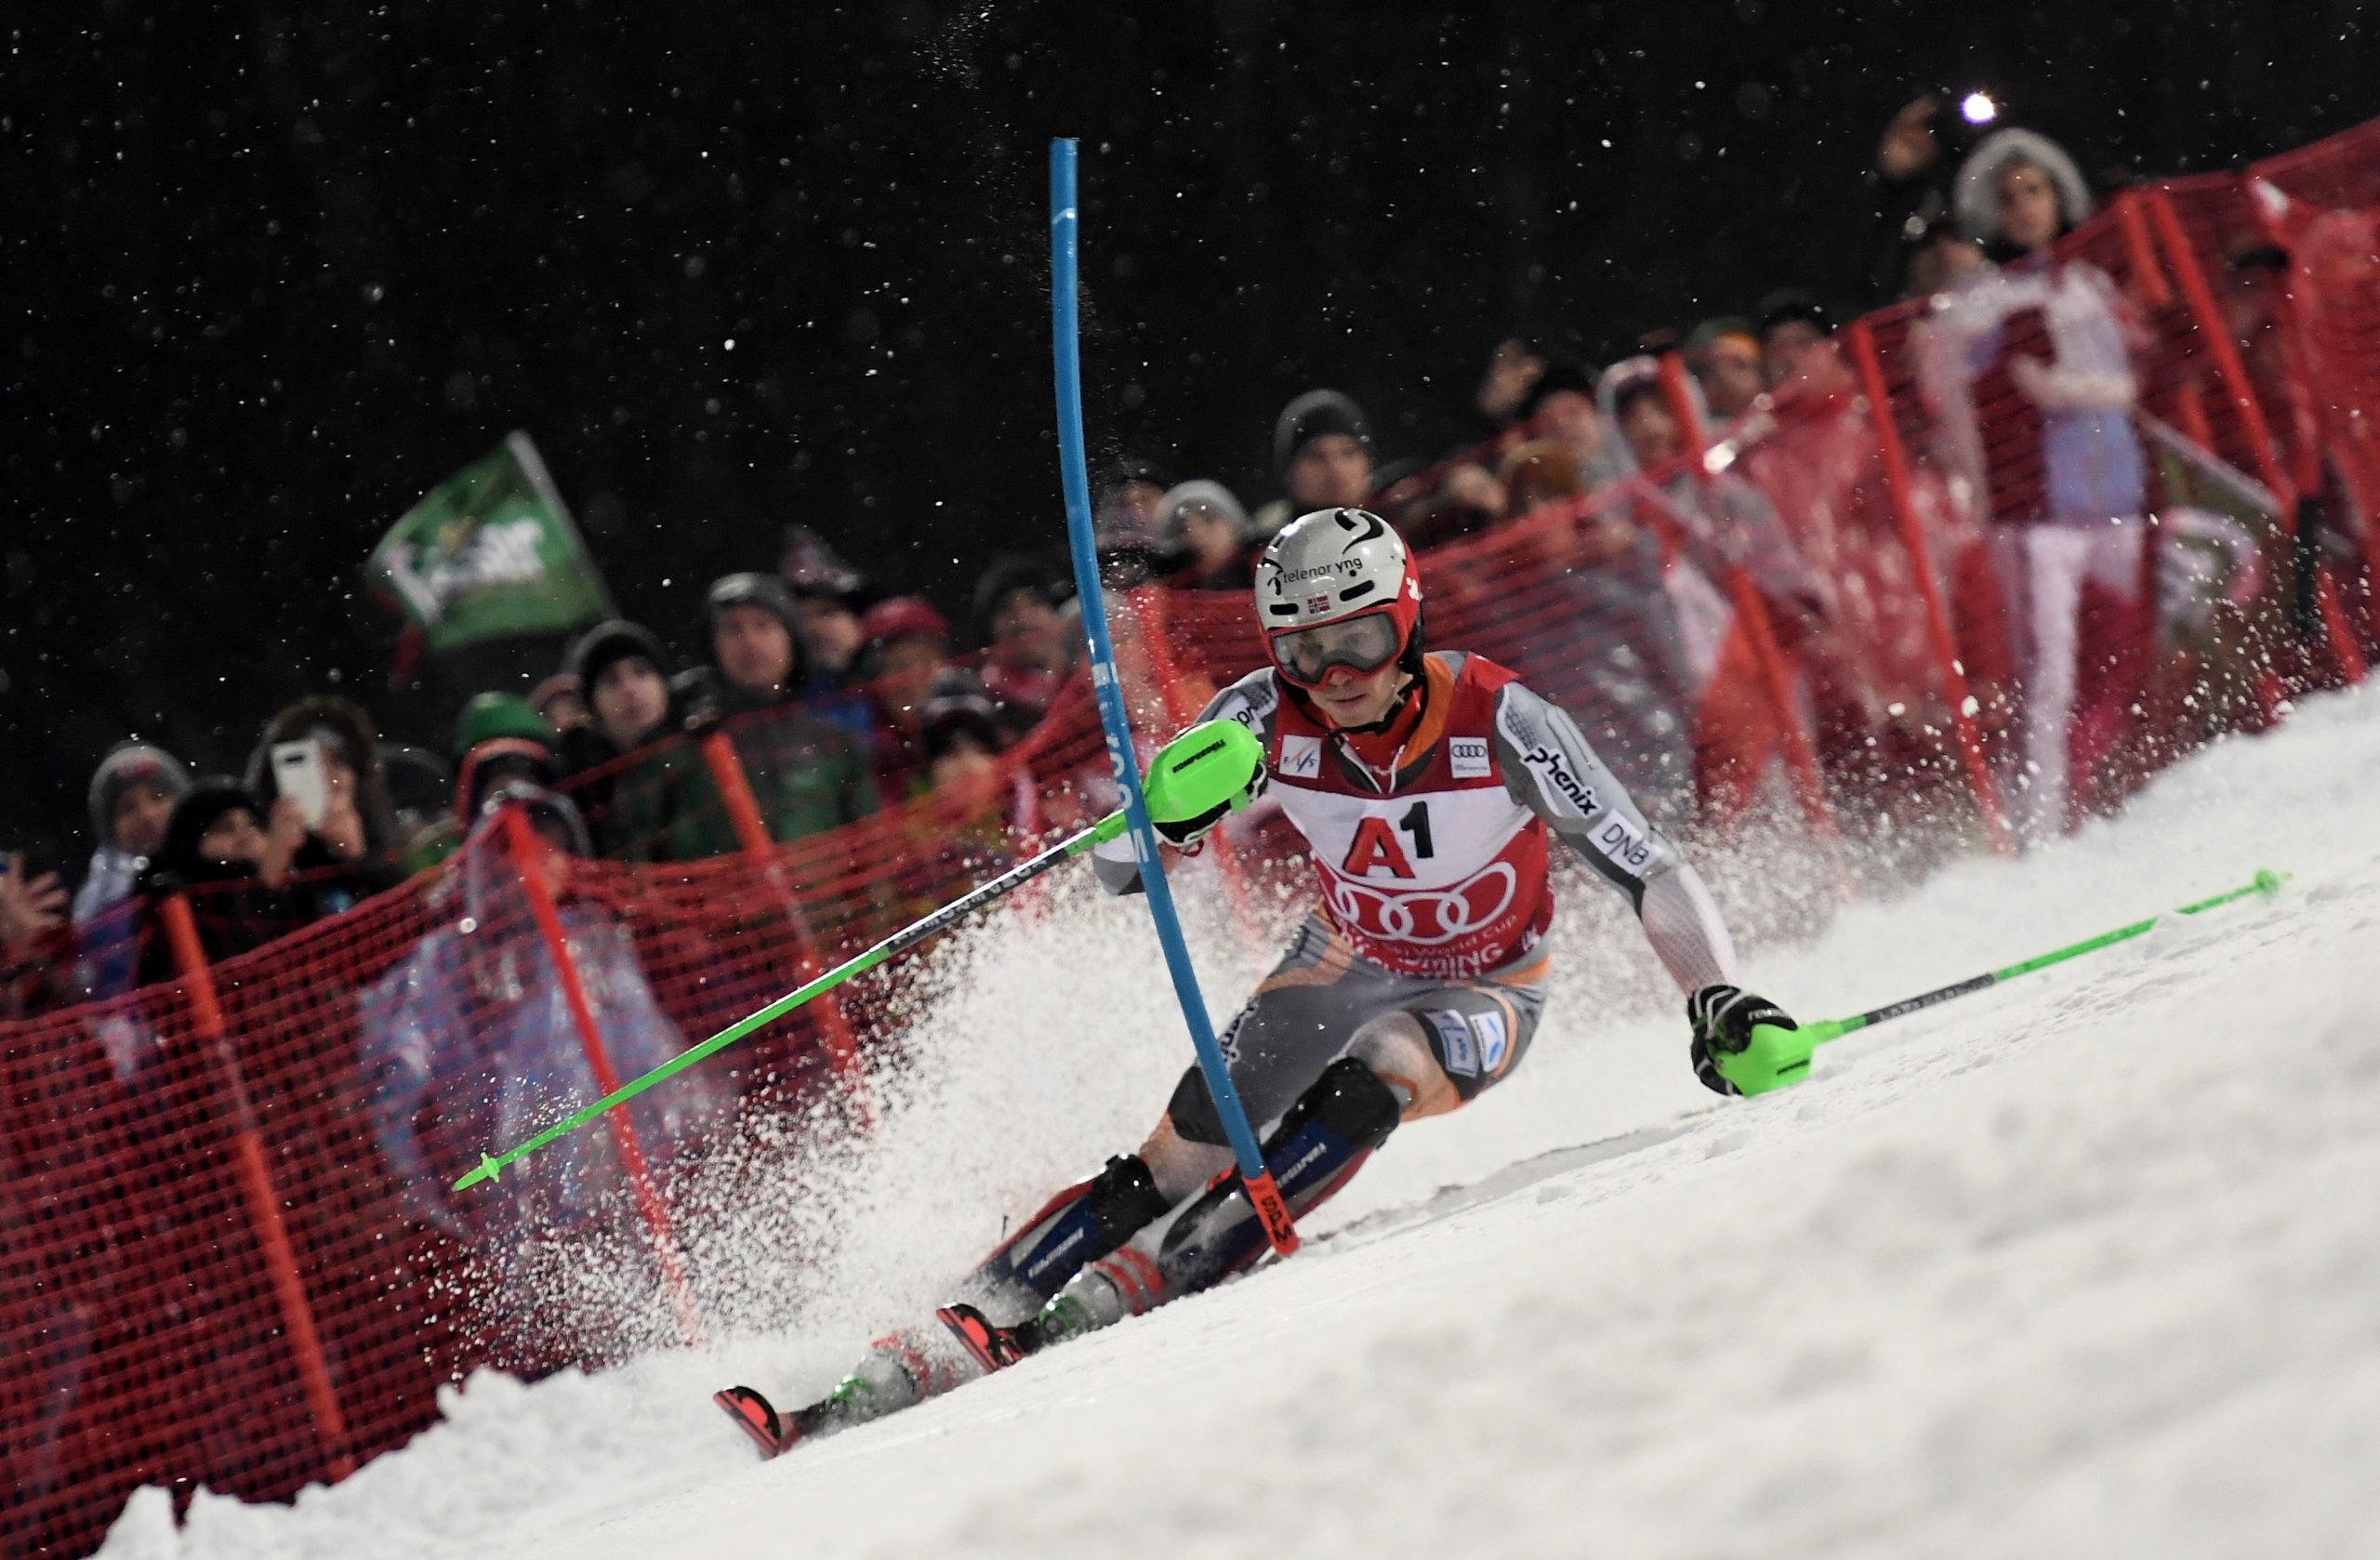 epa08172966 Henrik Kristoffersen of Norway in action during the first run of the men's Slalom race of the FIS Alpine Skiing World Cup event in Schladming, Austria, 28 January 2020.  EPA/CHRISTIAN BRUNA